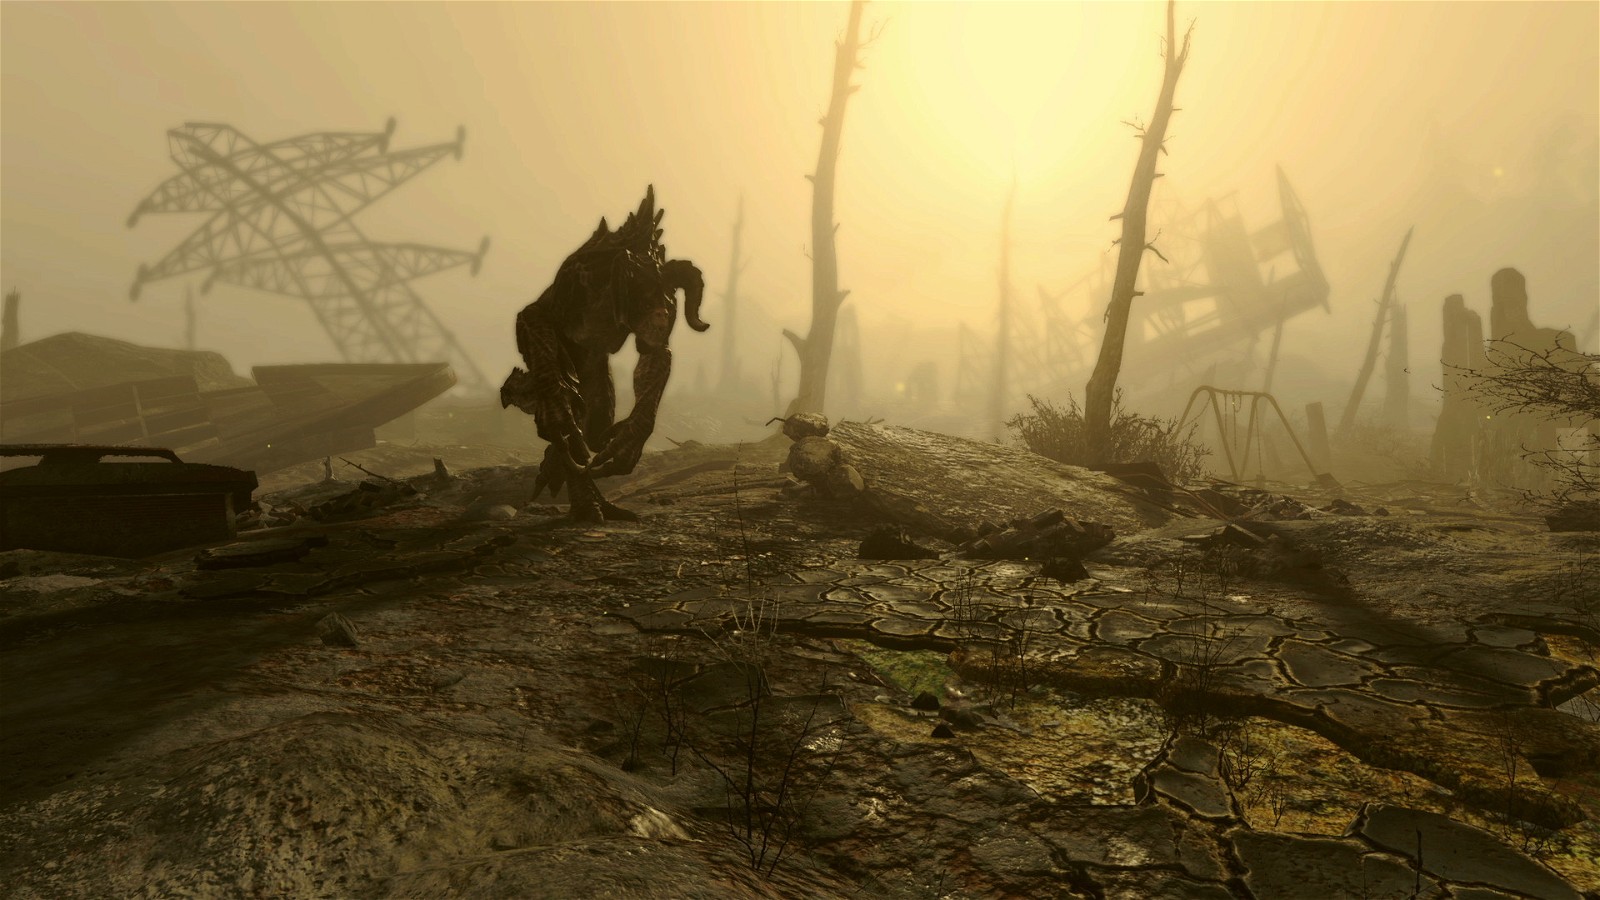 A still of Deathclaws from Fallout